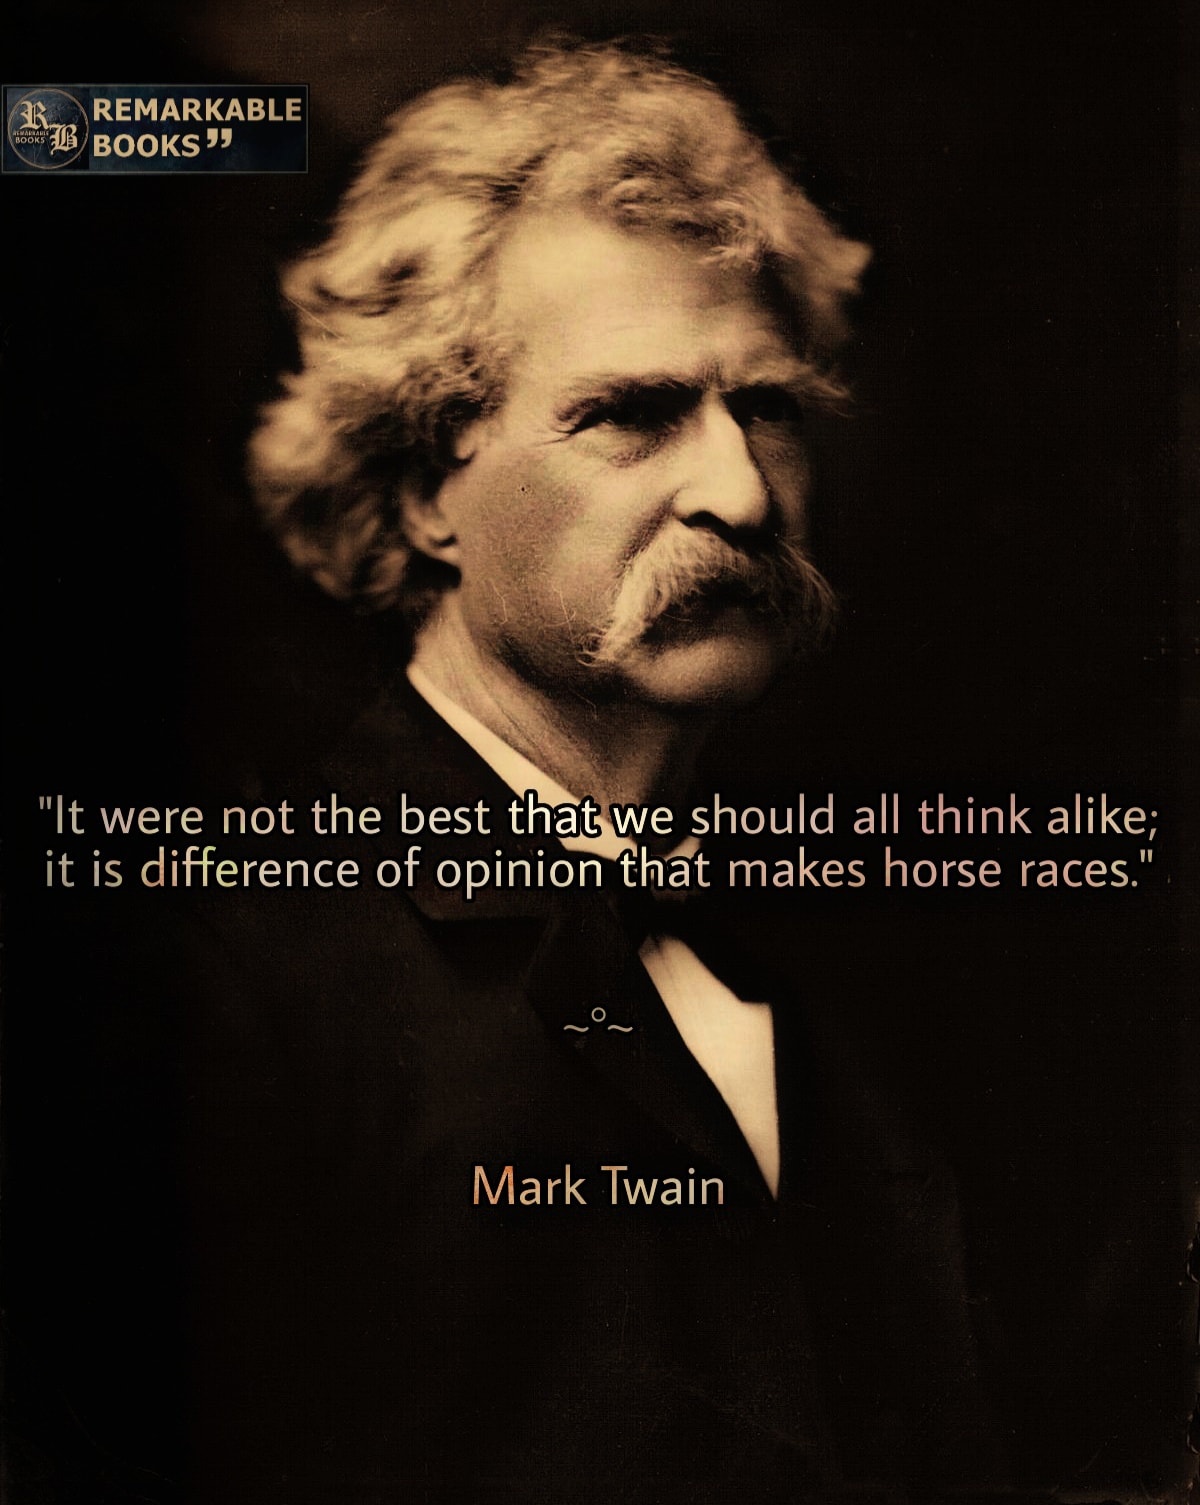 It were not best that we should all think alike; it is difference of opinion that makes horse races. Mark Twain